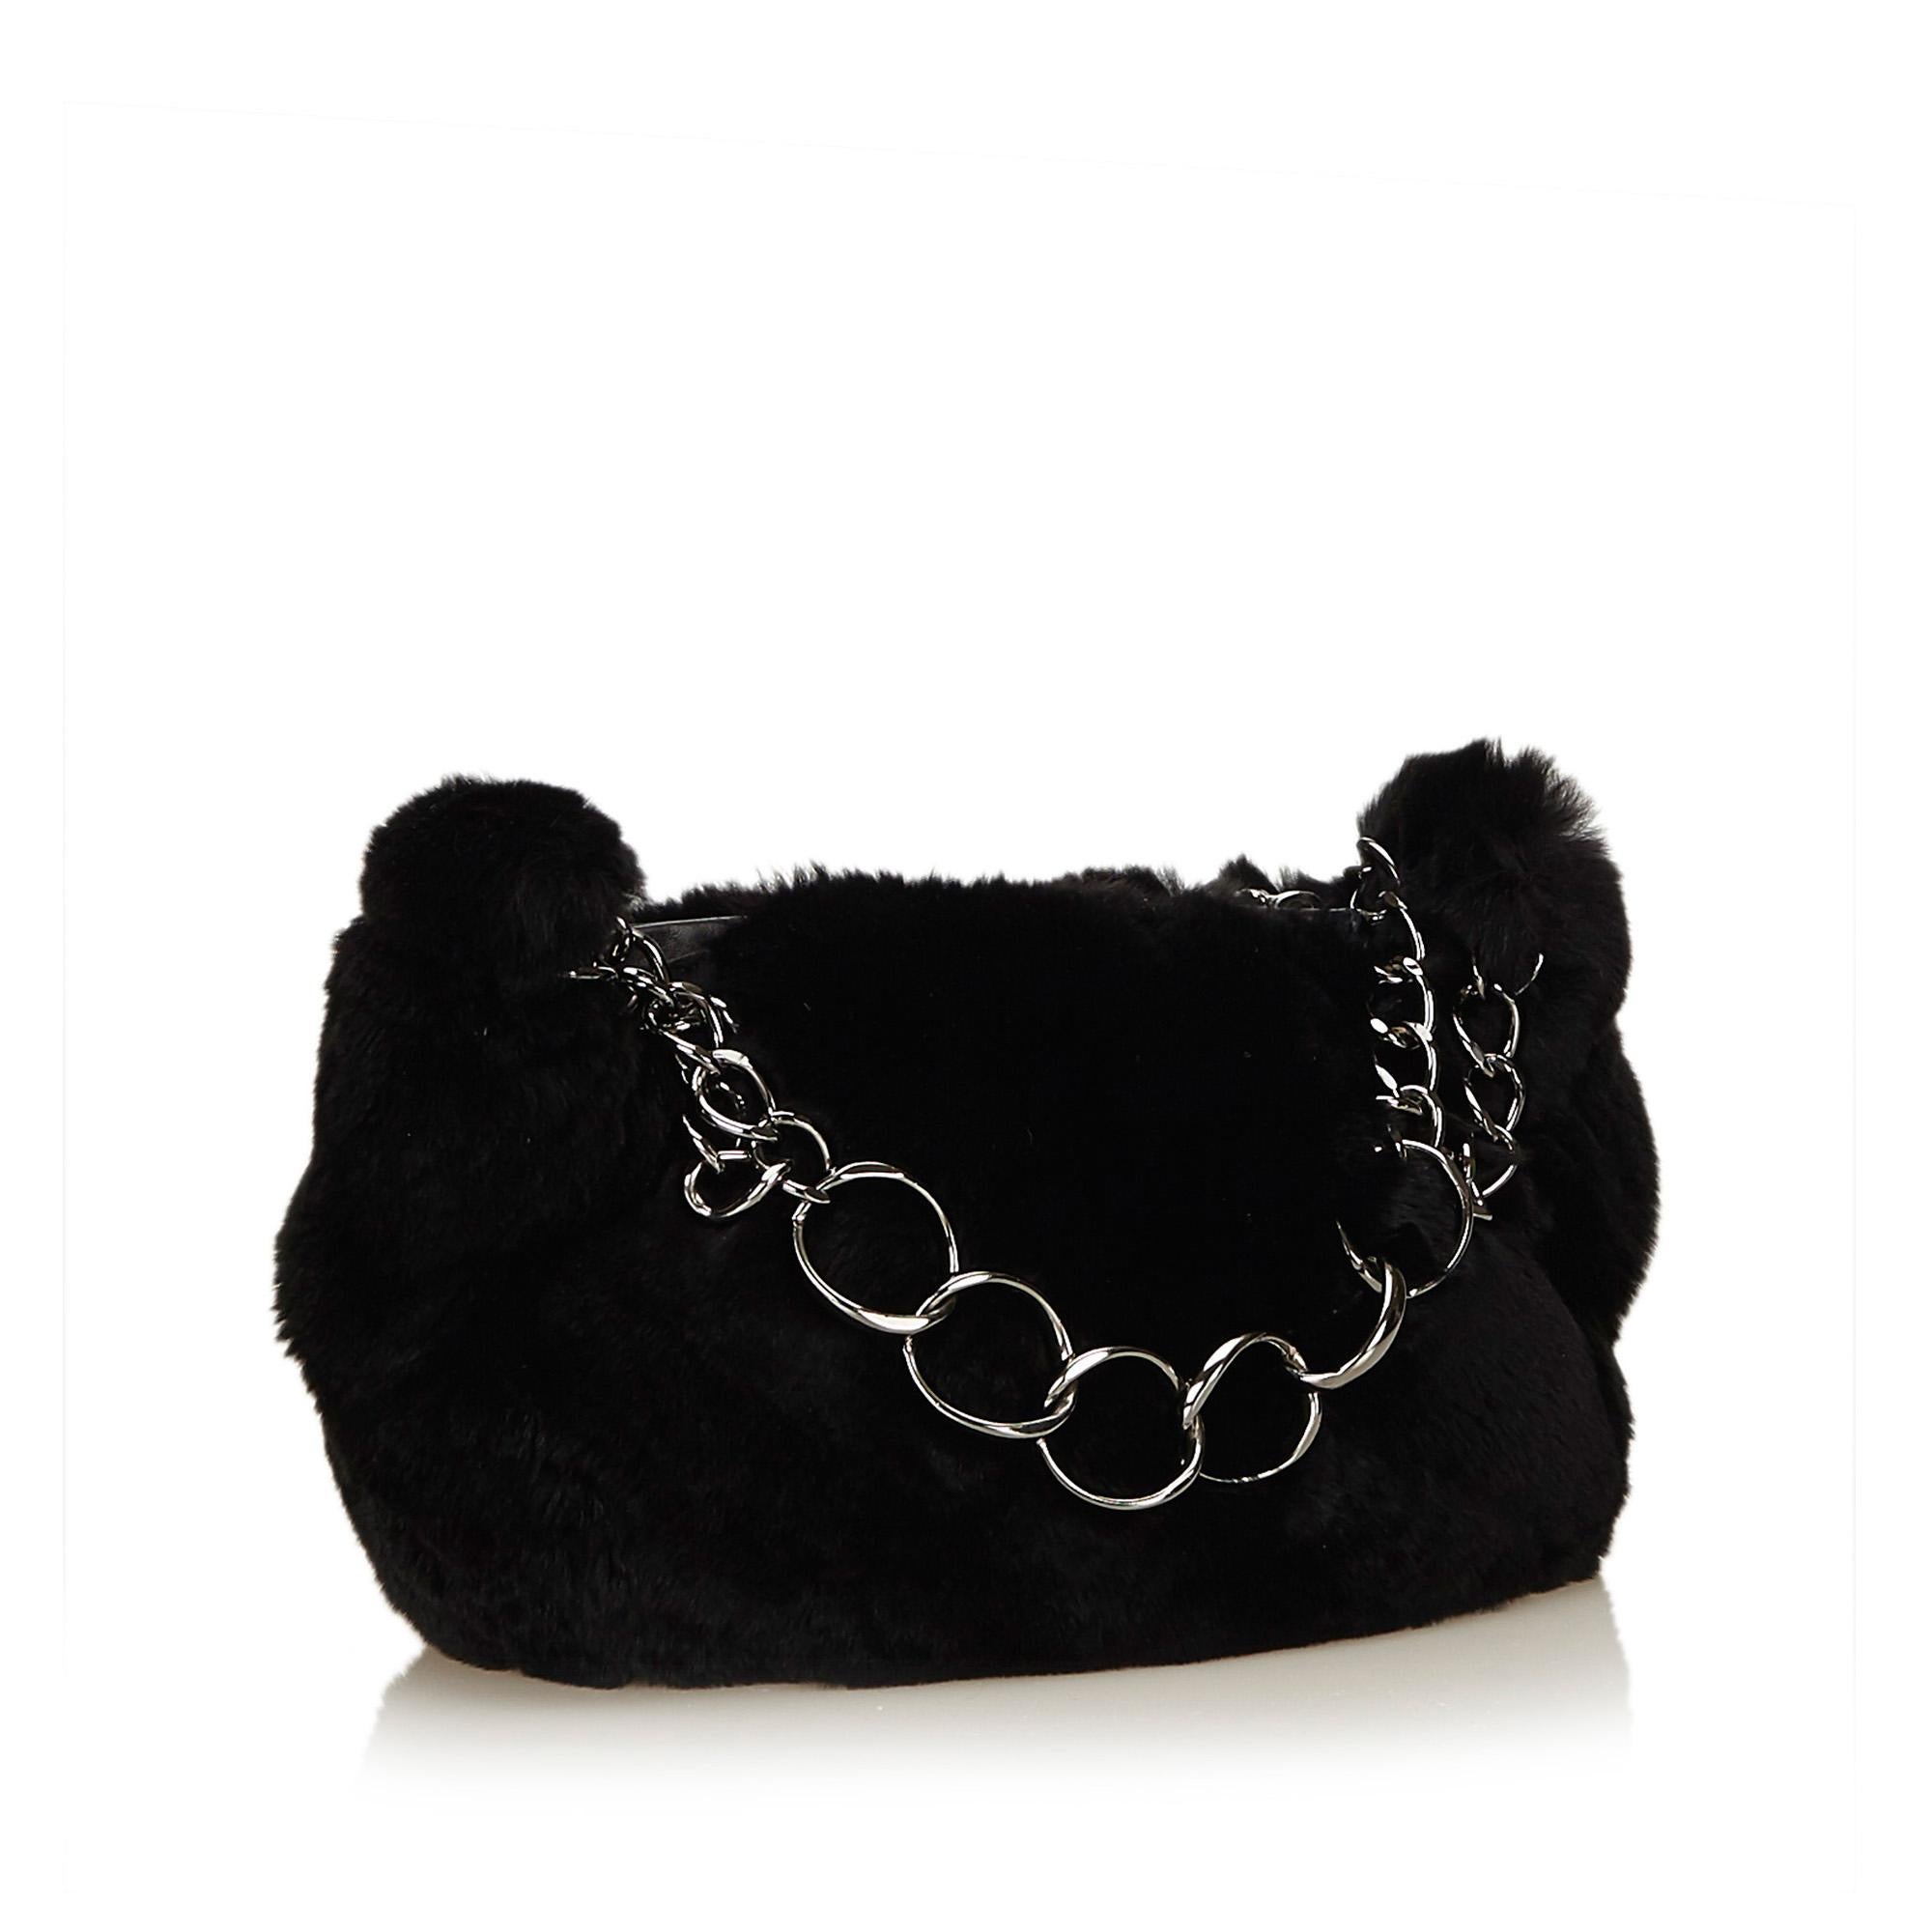 This handbag features a fur body, silver-tone chain, and a top zip closure. It carries as B+ condition rating.

Inclusions: 
Dust Bag
Authenticity Card

Dimensions:
Length: 25.00 cm
Width: 15.00 cm
Depth: 8.00 cm
Hand Drop: 15.00 cm

Serial Number: